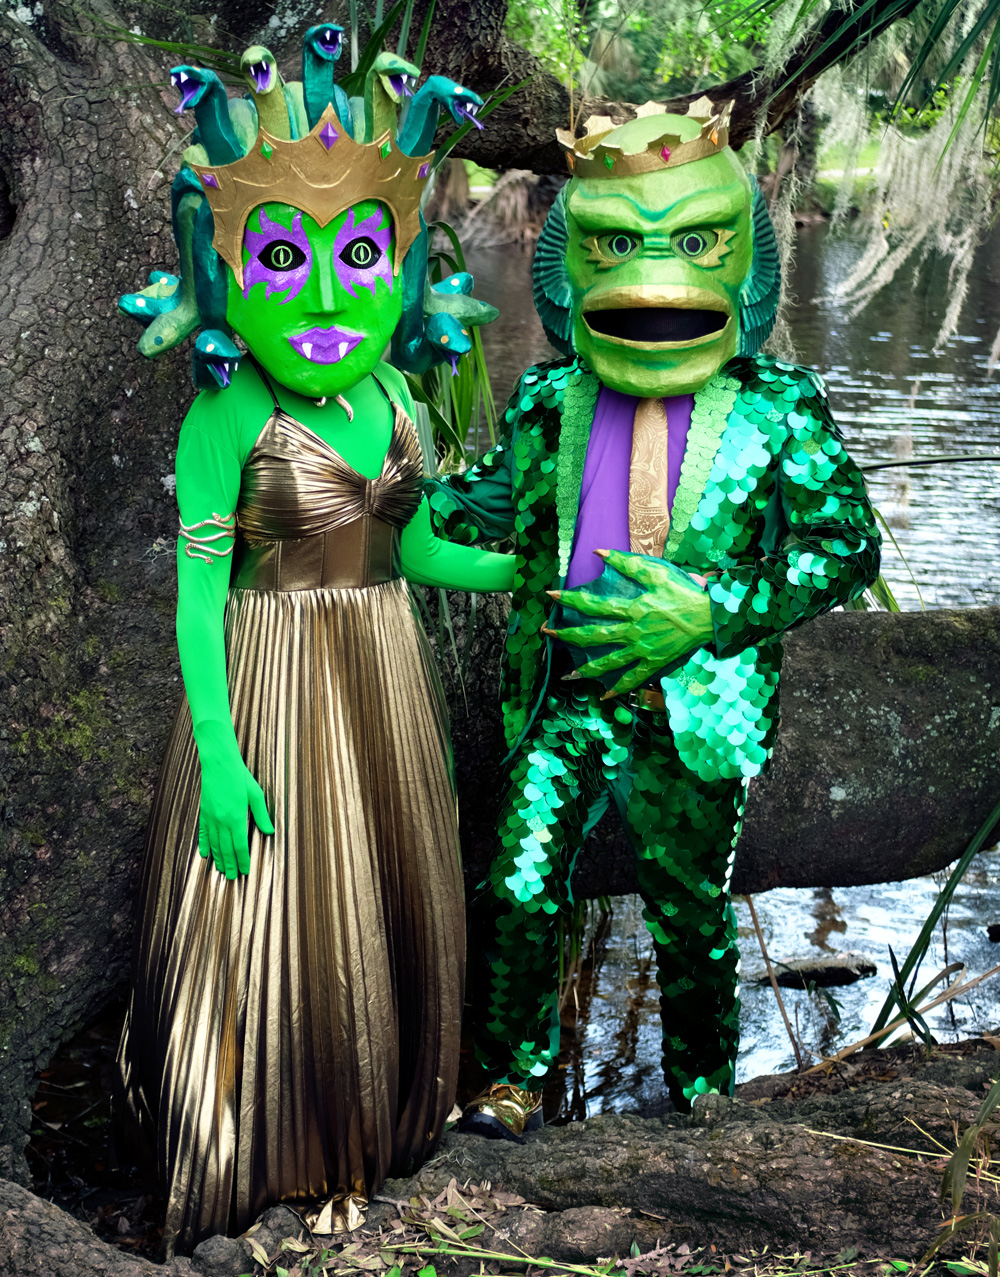 Medusa costume and Creature from the Black Lagoon costume